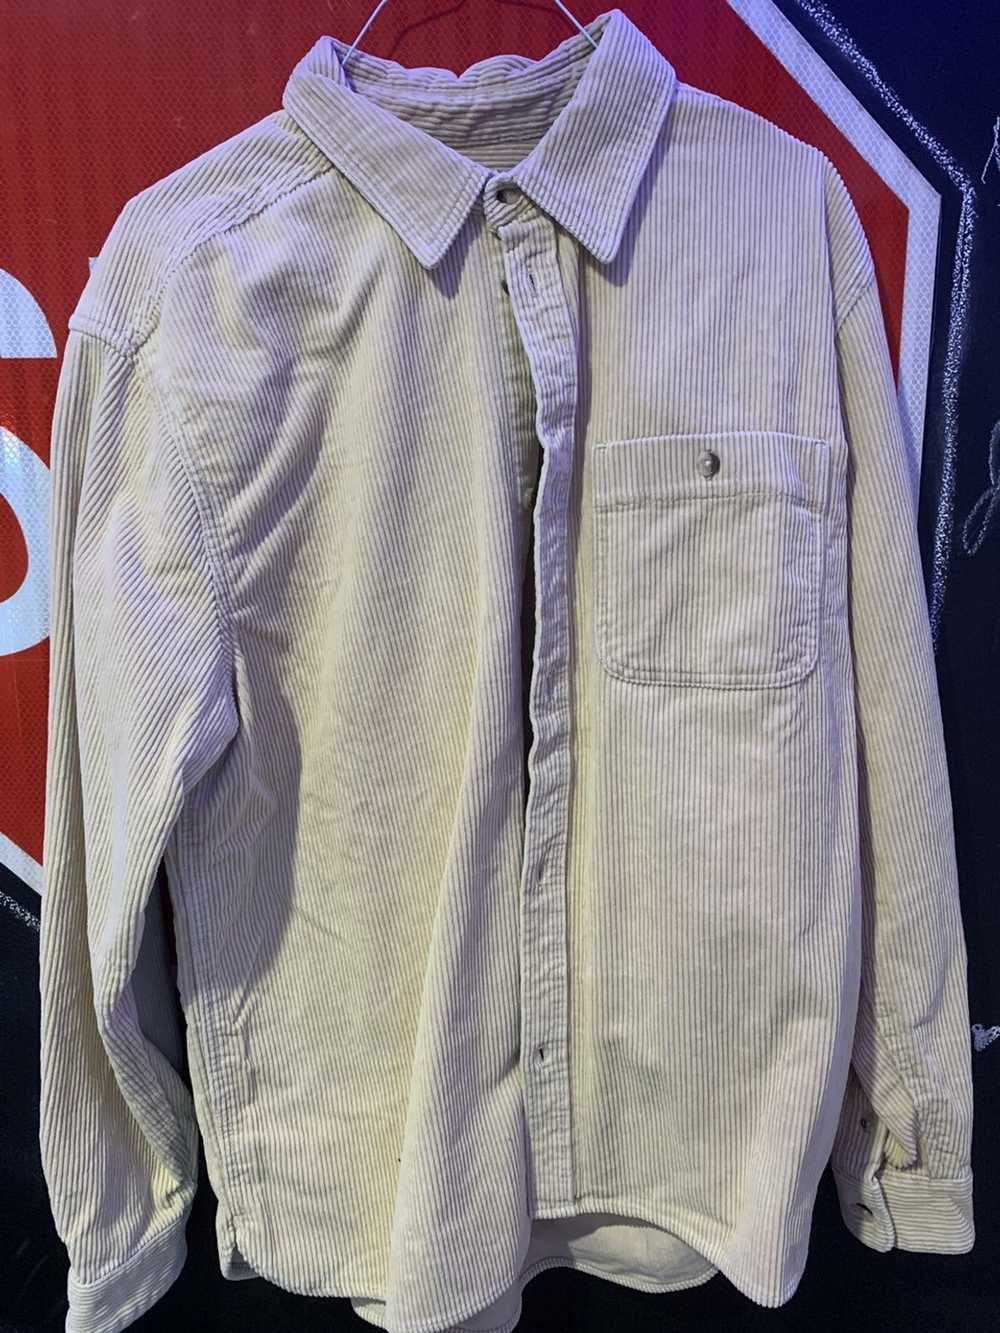 Urban Outfitters corduroy button up collard shirt - image 1